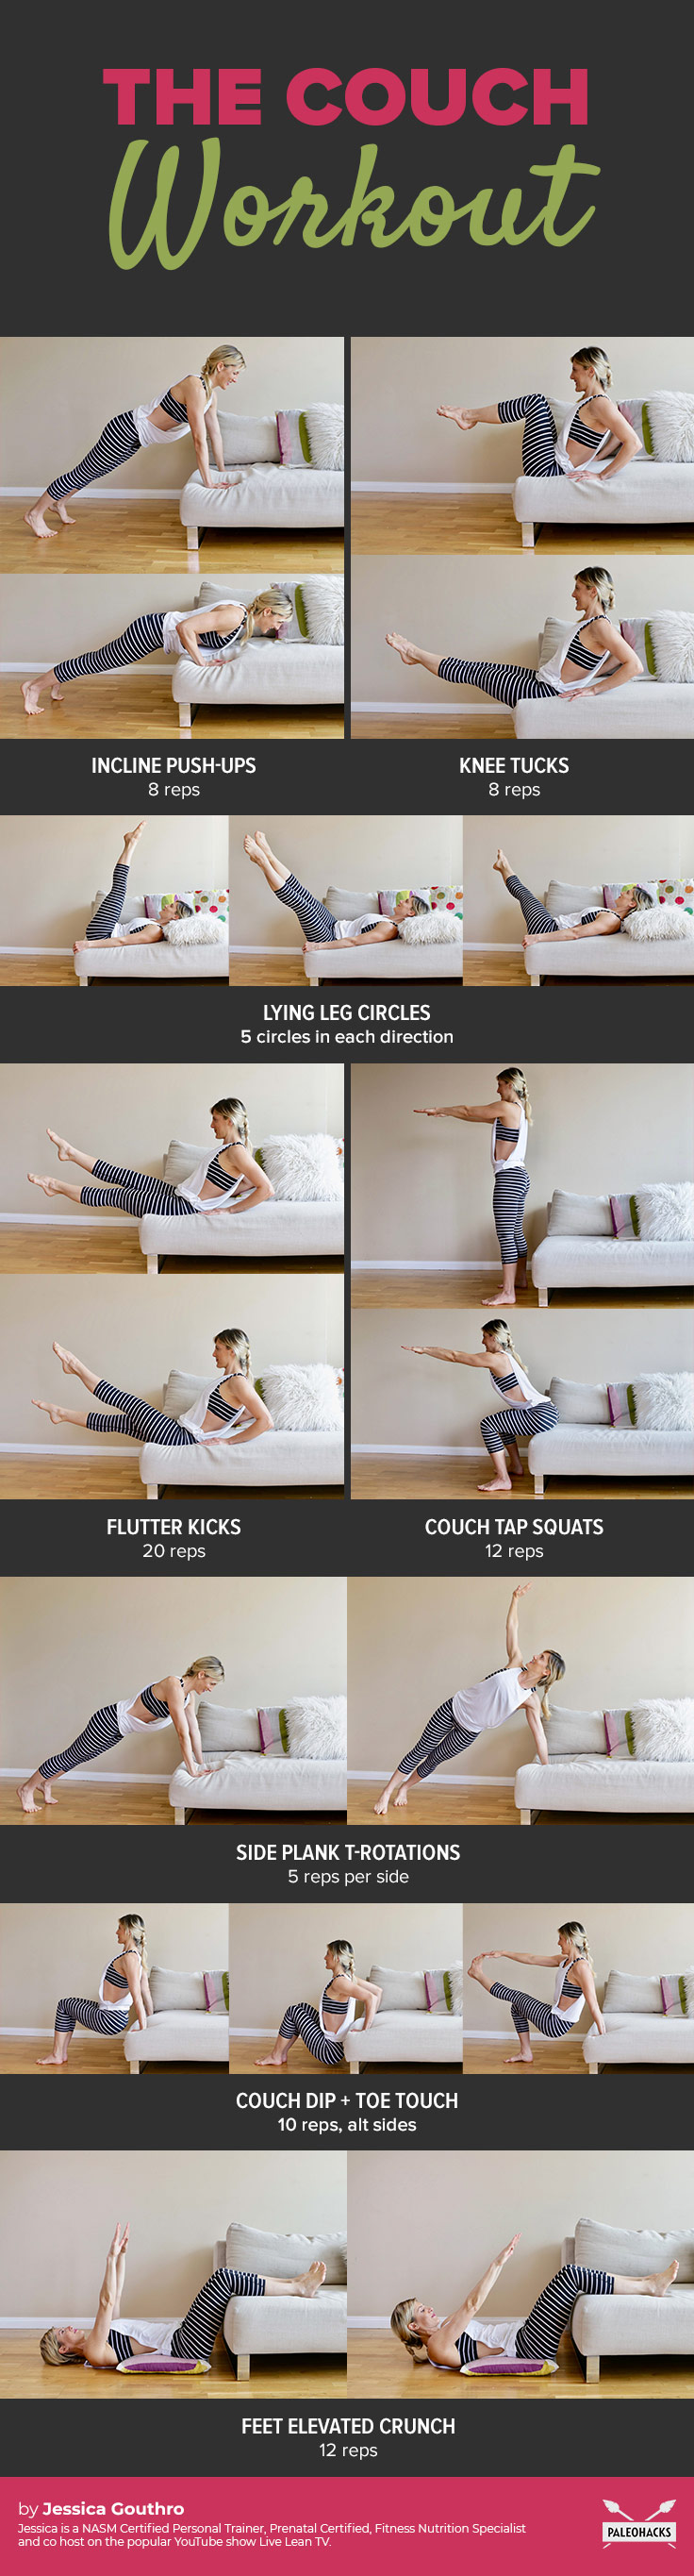 Whether you’re traveling or just don’t feel like leaving the house, this quick couch workout will tone up your arms, abs, legs and butt.